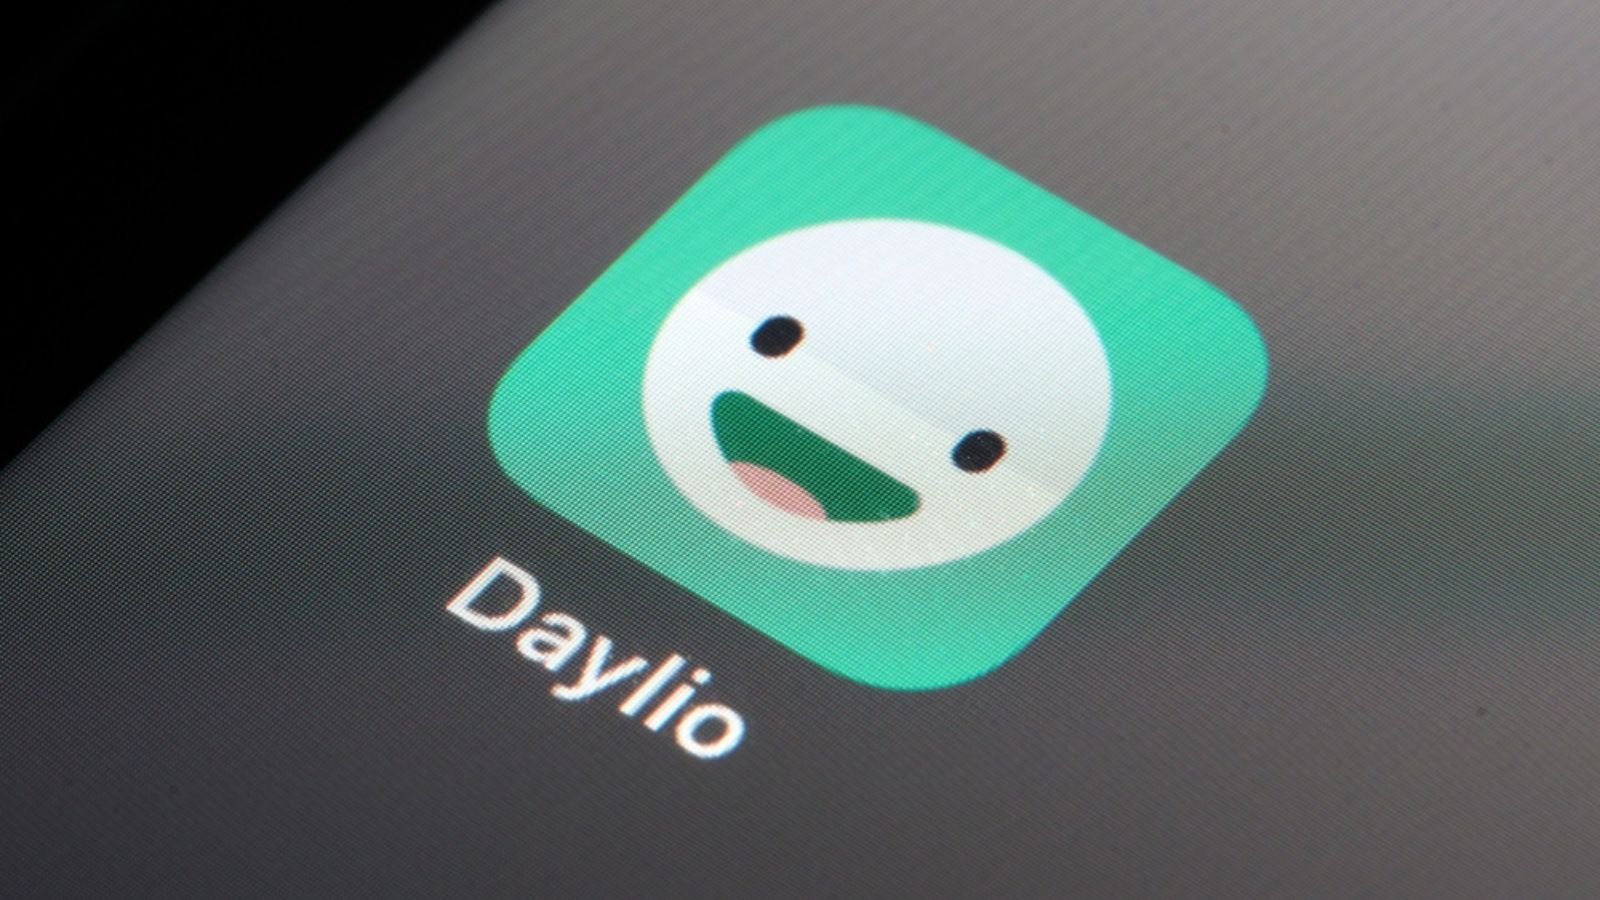 <p><a href="https://daylio.net/" rel="noopener external noreferrer">Daylio</a> is a unique app that allows users to maintain a private journal without typing a single line. It’s a mood tracker that lets you log your daily moods and activities, providing insights to understand your habits better. Integrating Daylio into their daily routine allows users to track their moods effectively, improving self-awareness and overall mental well-being.</p>